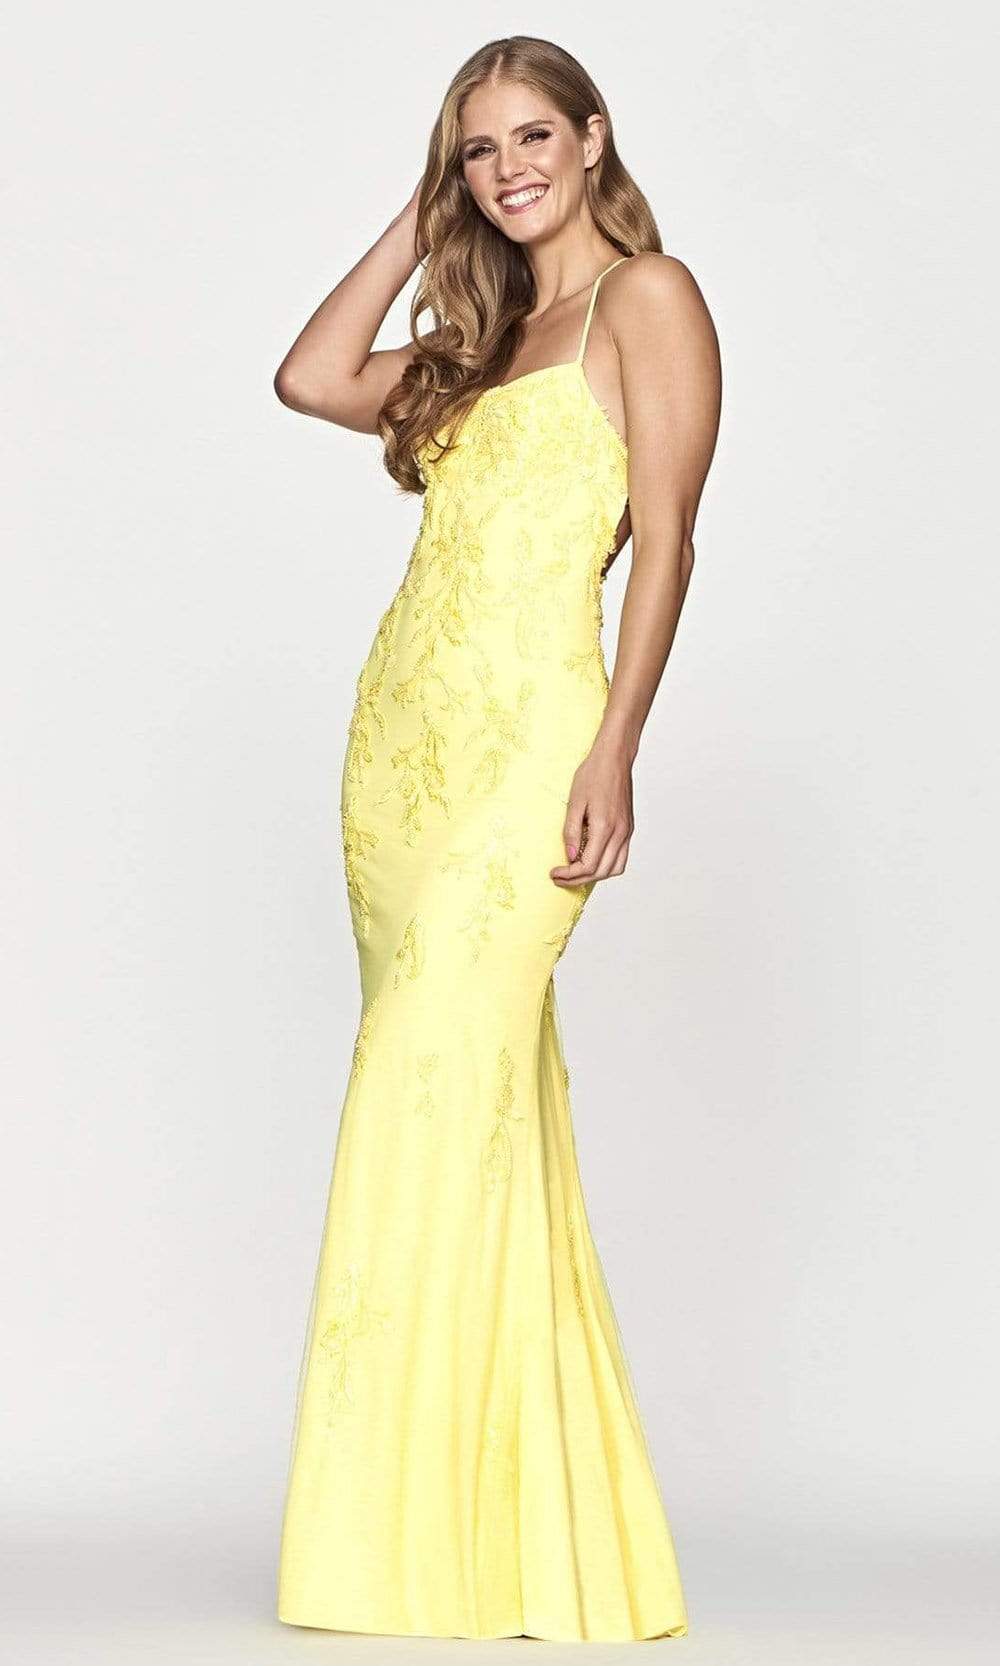 Image of Faviana - S10634 Sleeveless Lace Appliqued Gown